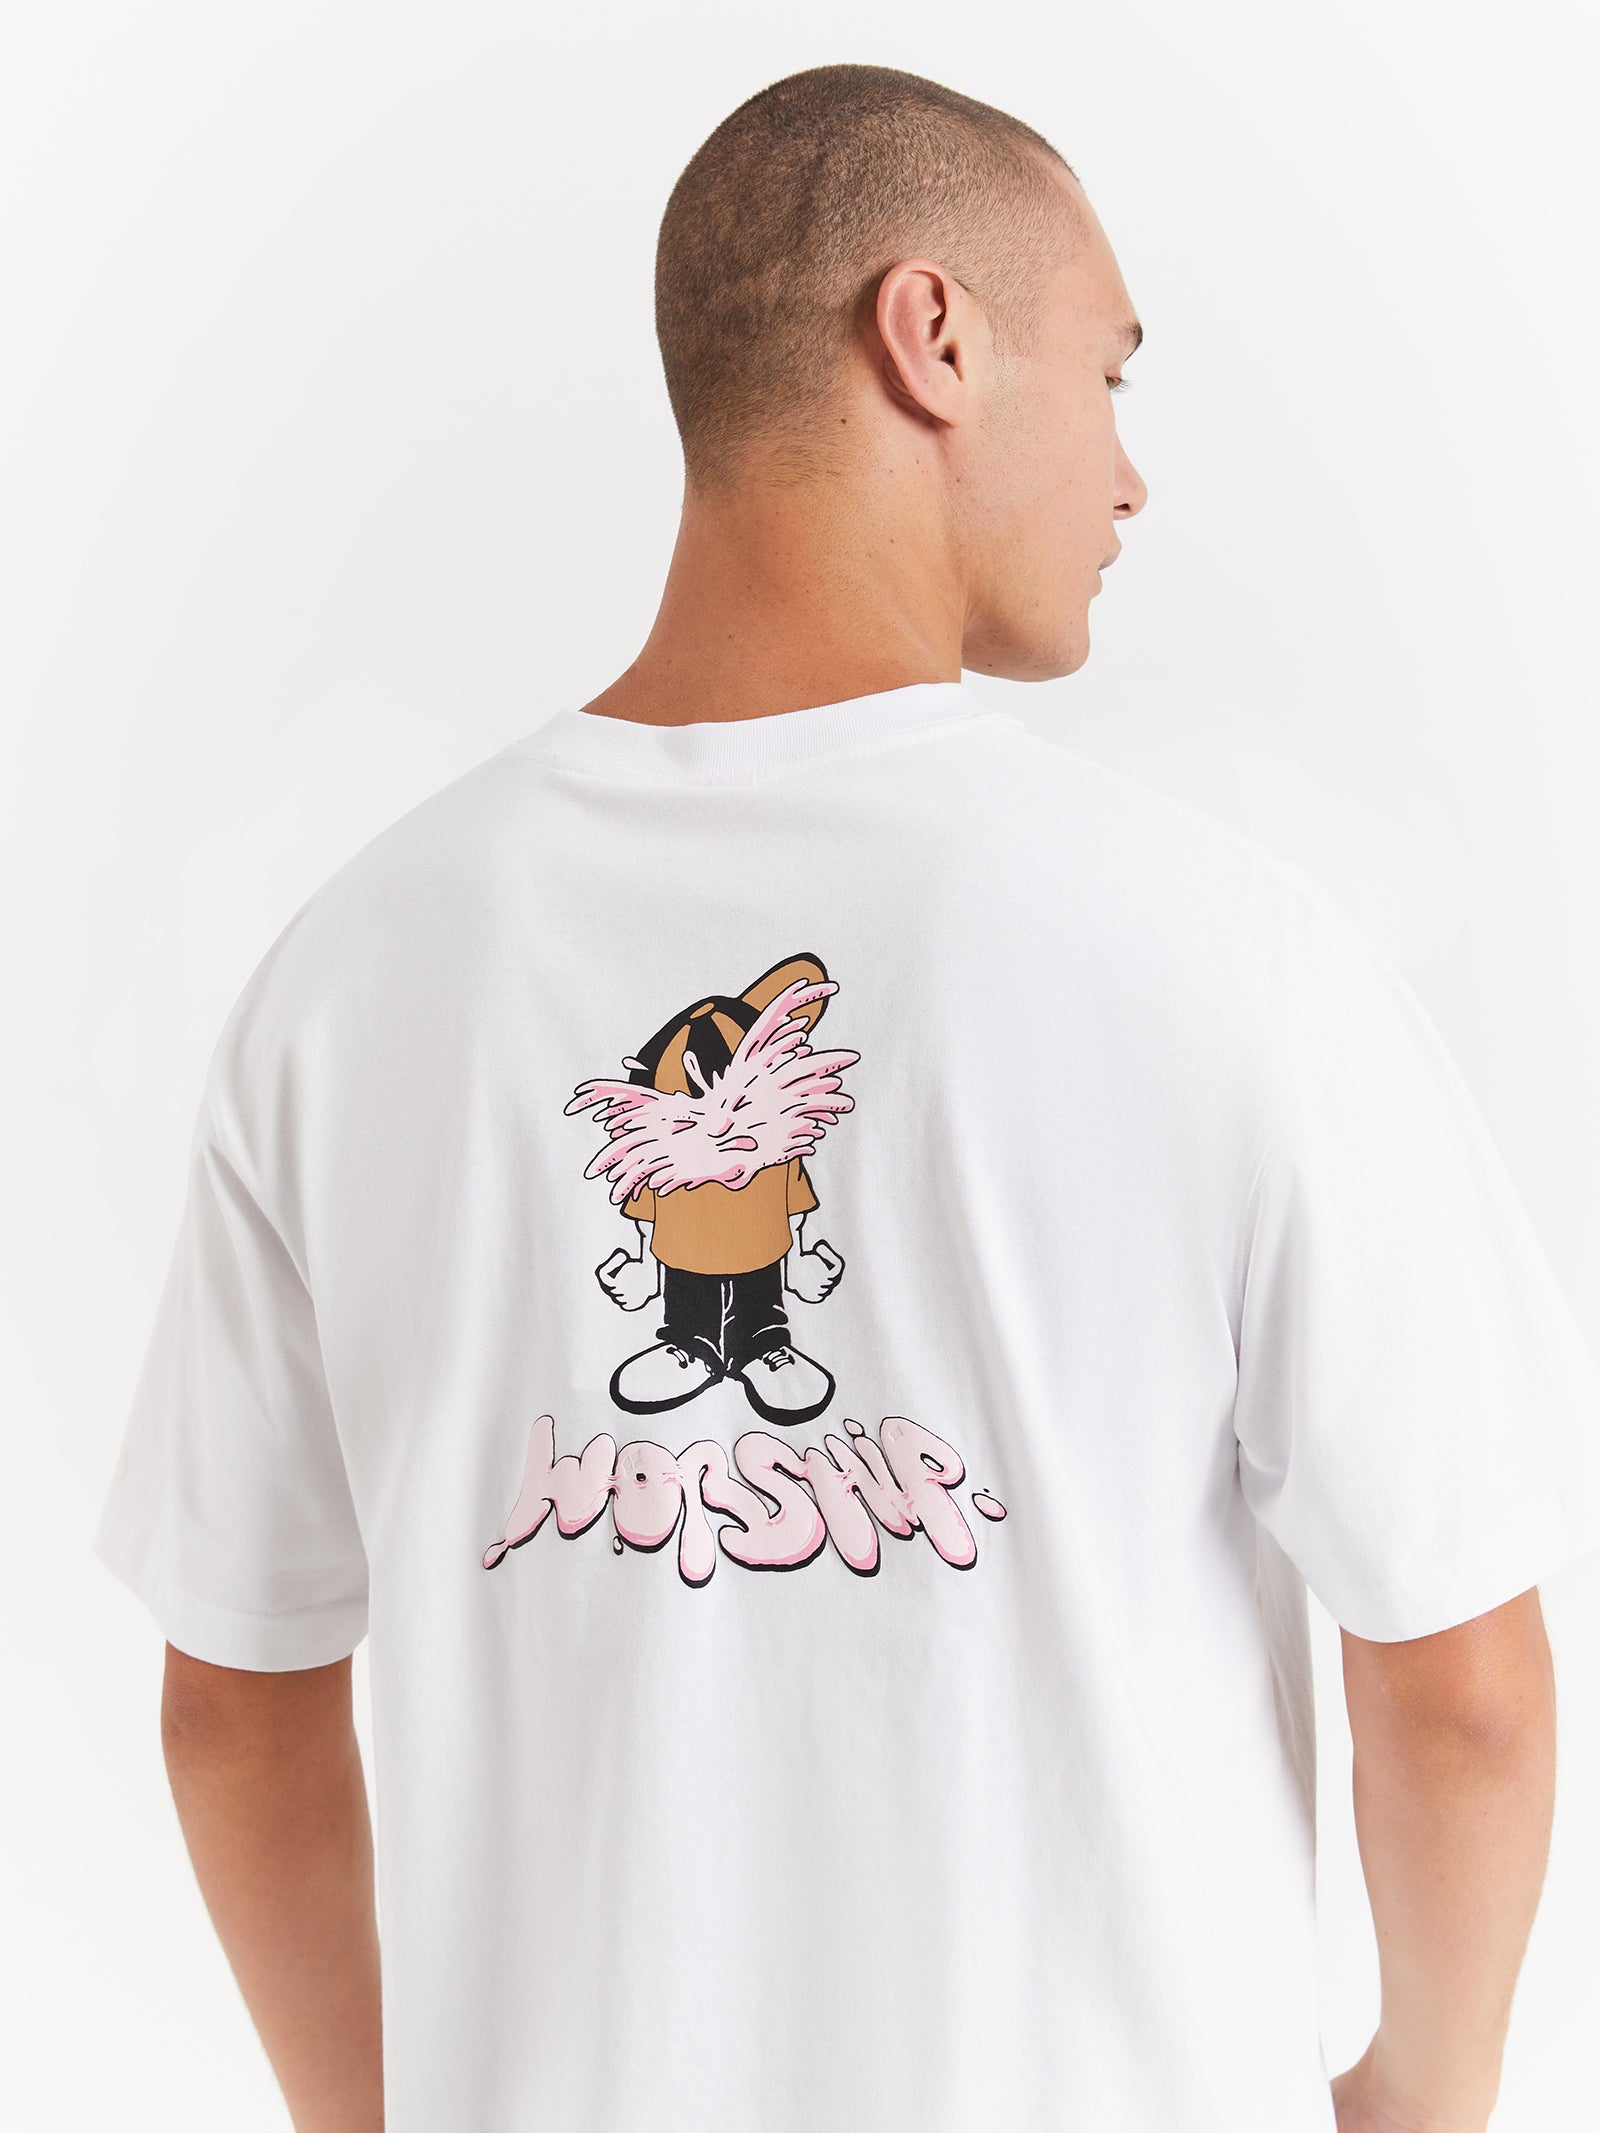 Bubble Trouble T-Shirt in White